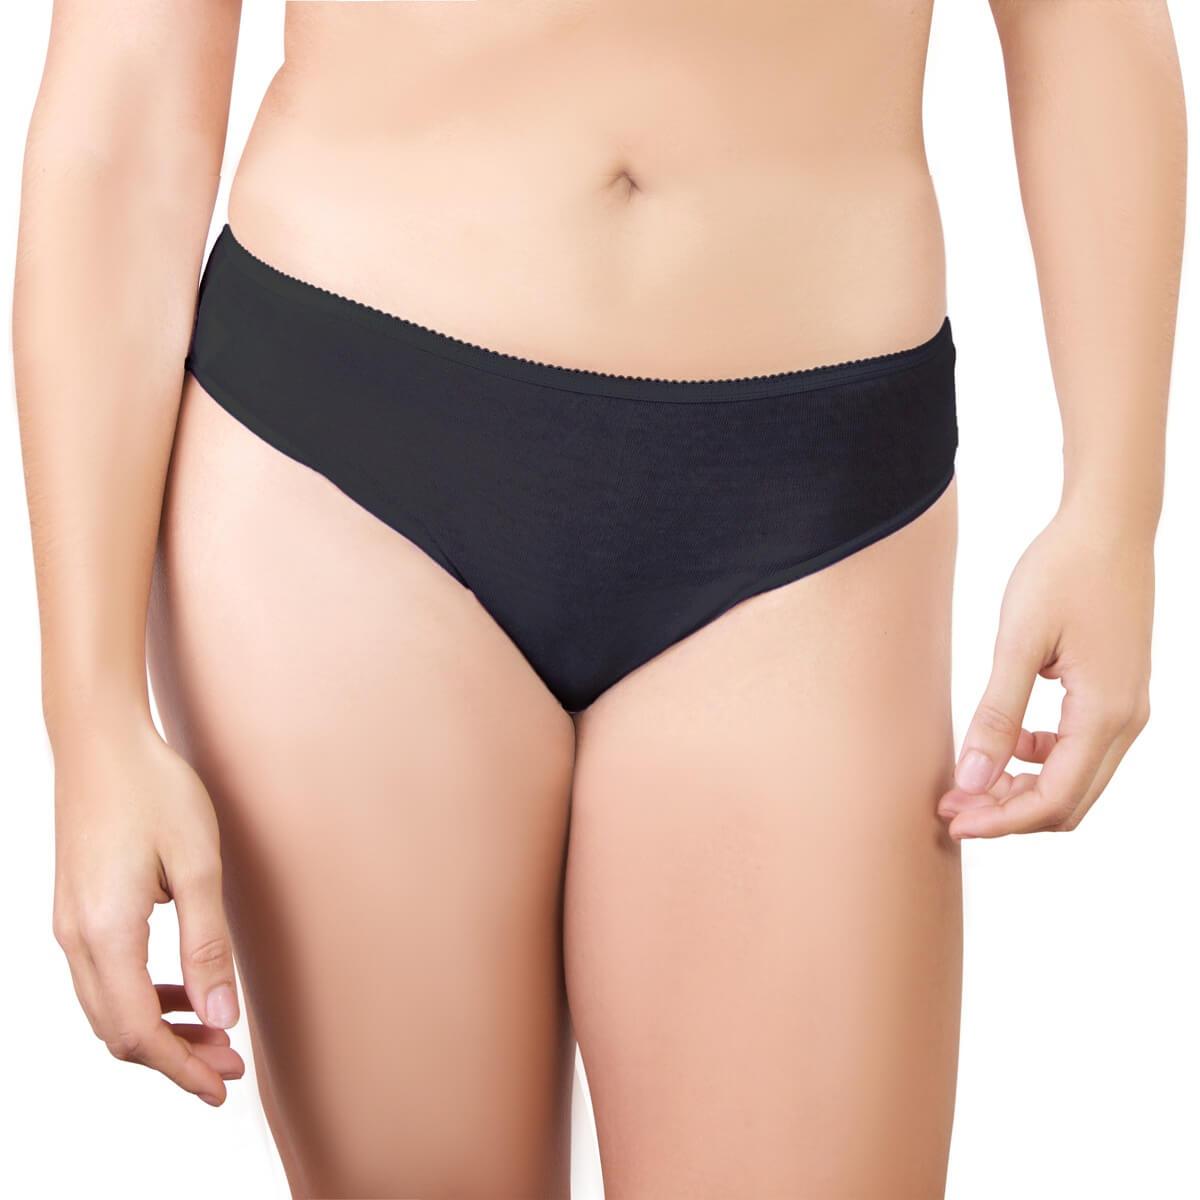 Disposable black cotton knickers pants briefs for hospital maternity –  OW-Travel